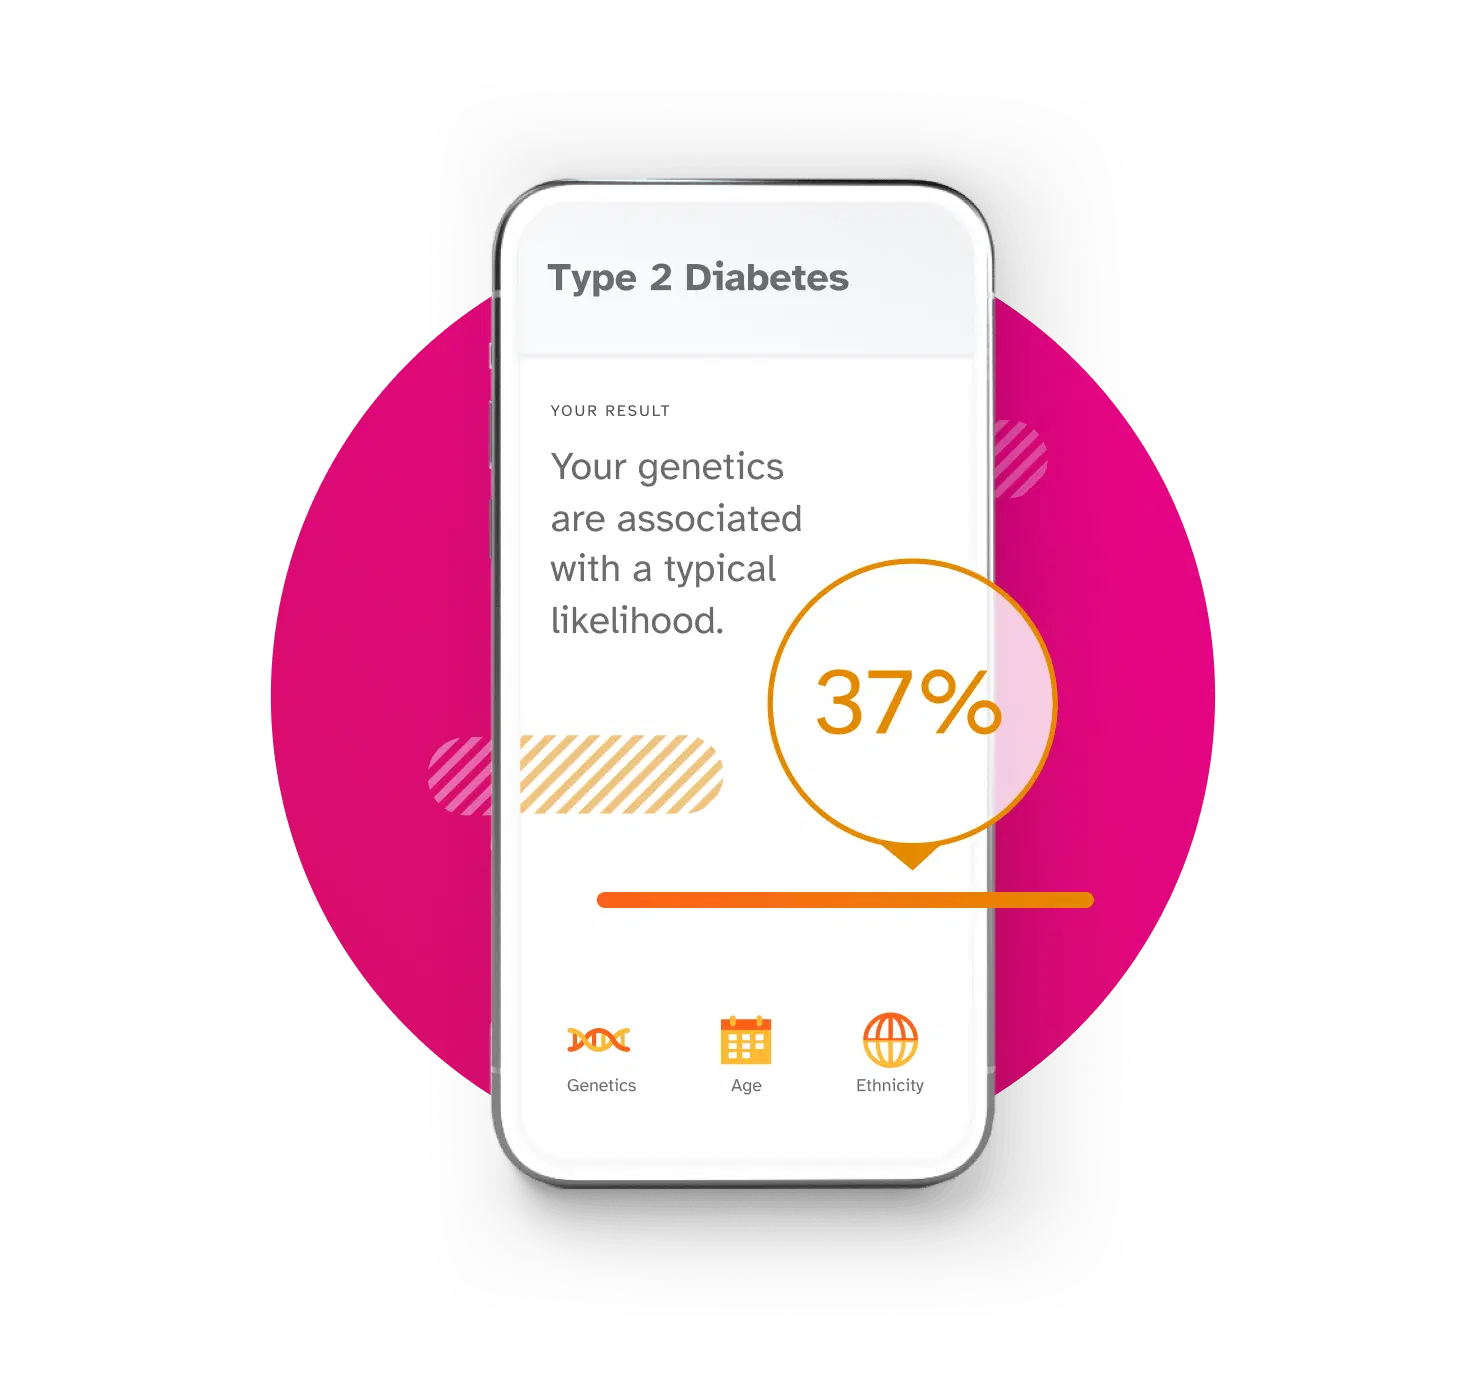 Phone screen showing Type 2 Diabetes report. Example result is Your genetics are associated with a typical likelihood, showing a likelihood of 37%. Factors included in this report include genetics, age, and ethnicity.